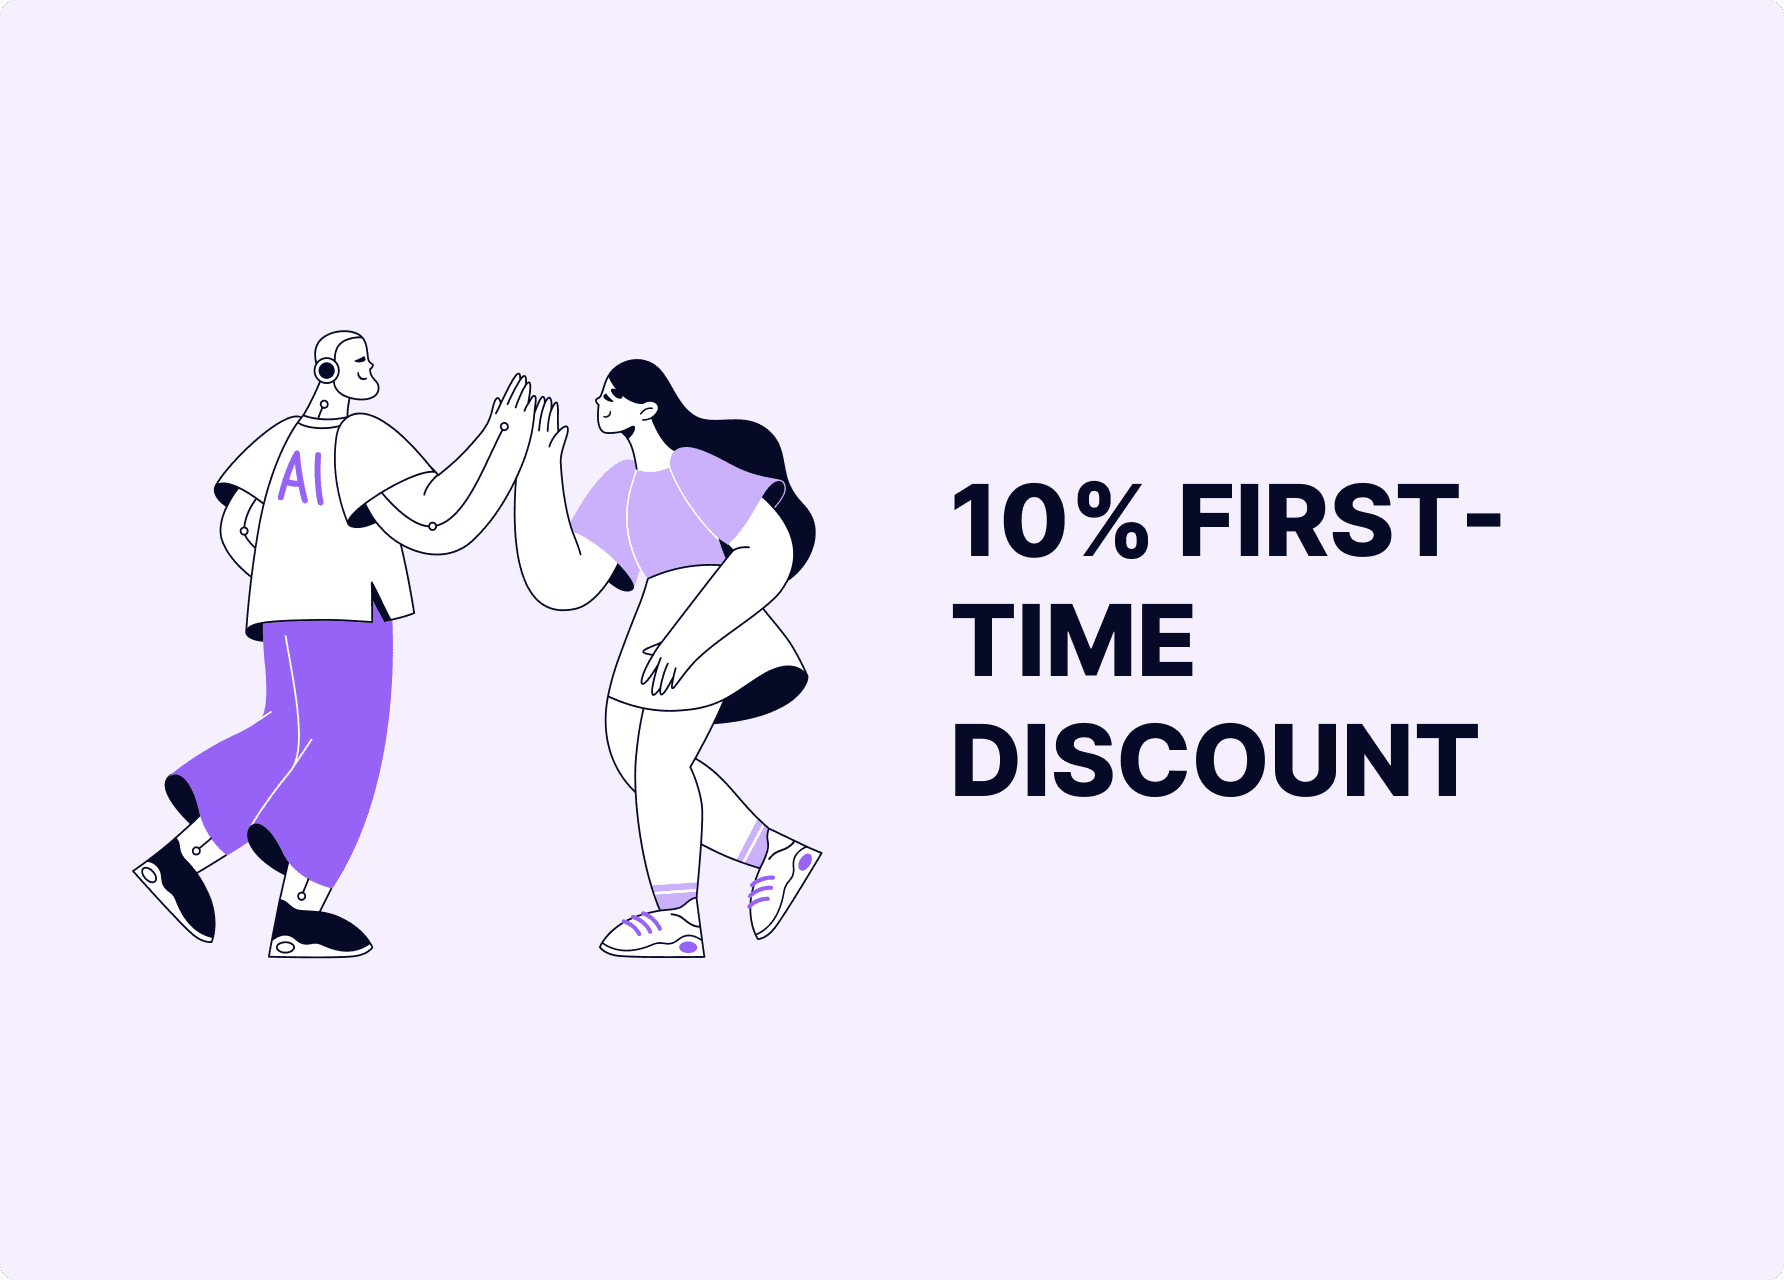 Get 10% off your first rental with code RUNDLE10 🤗